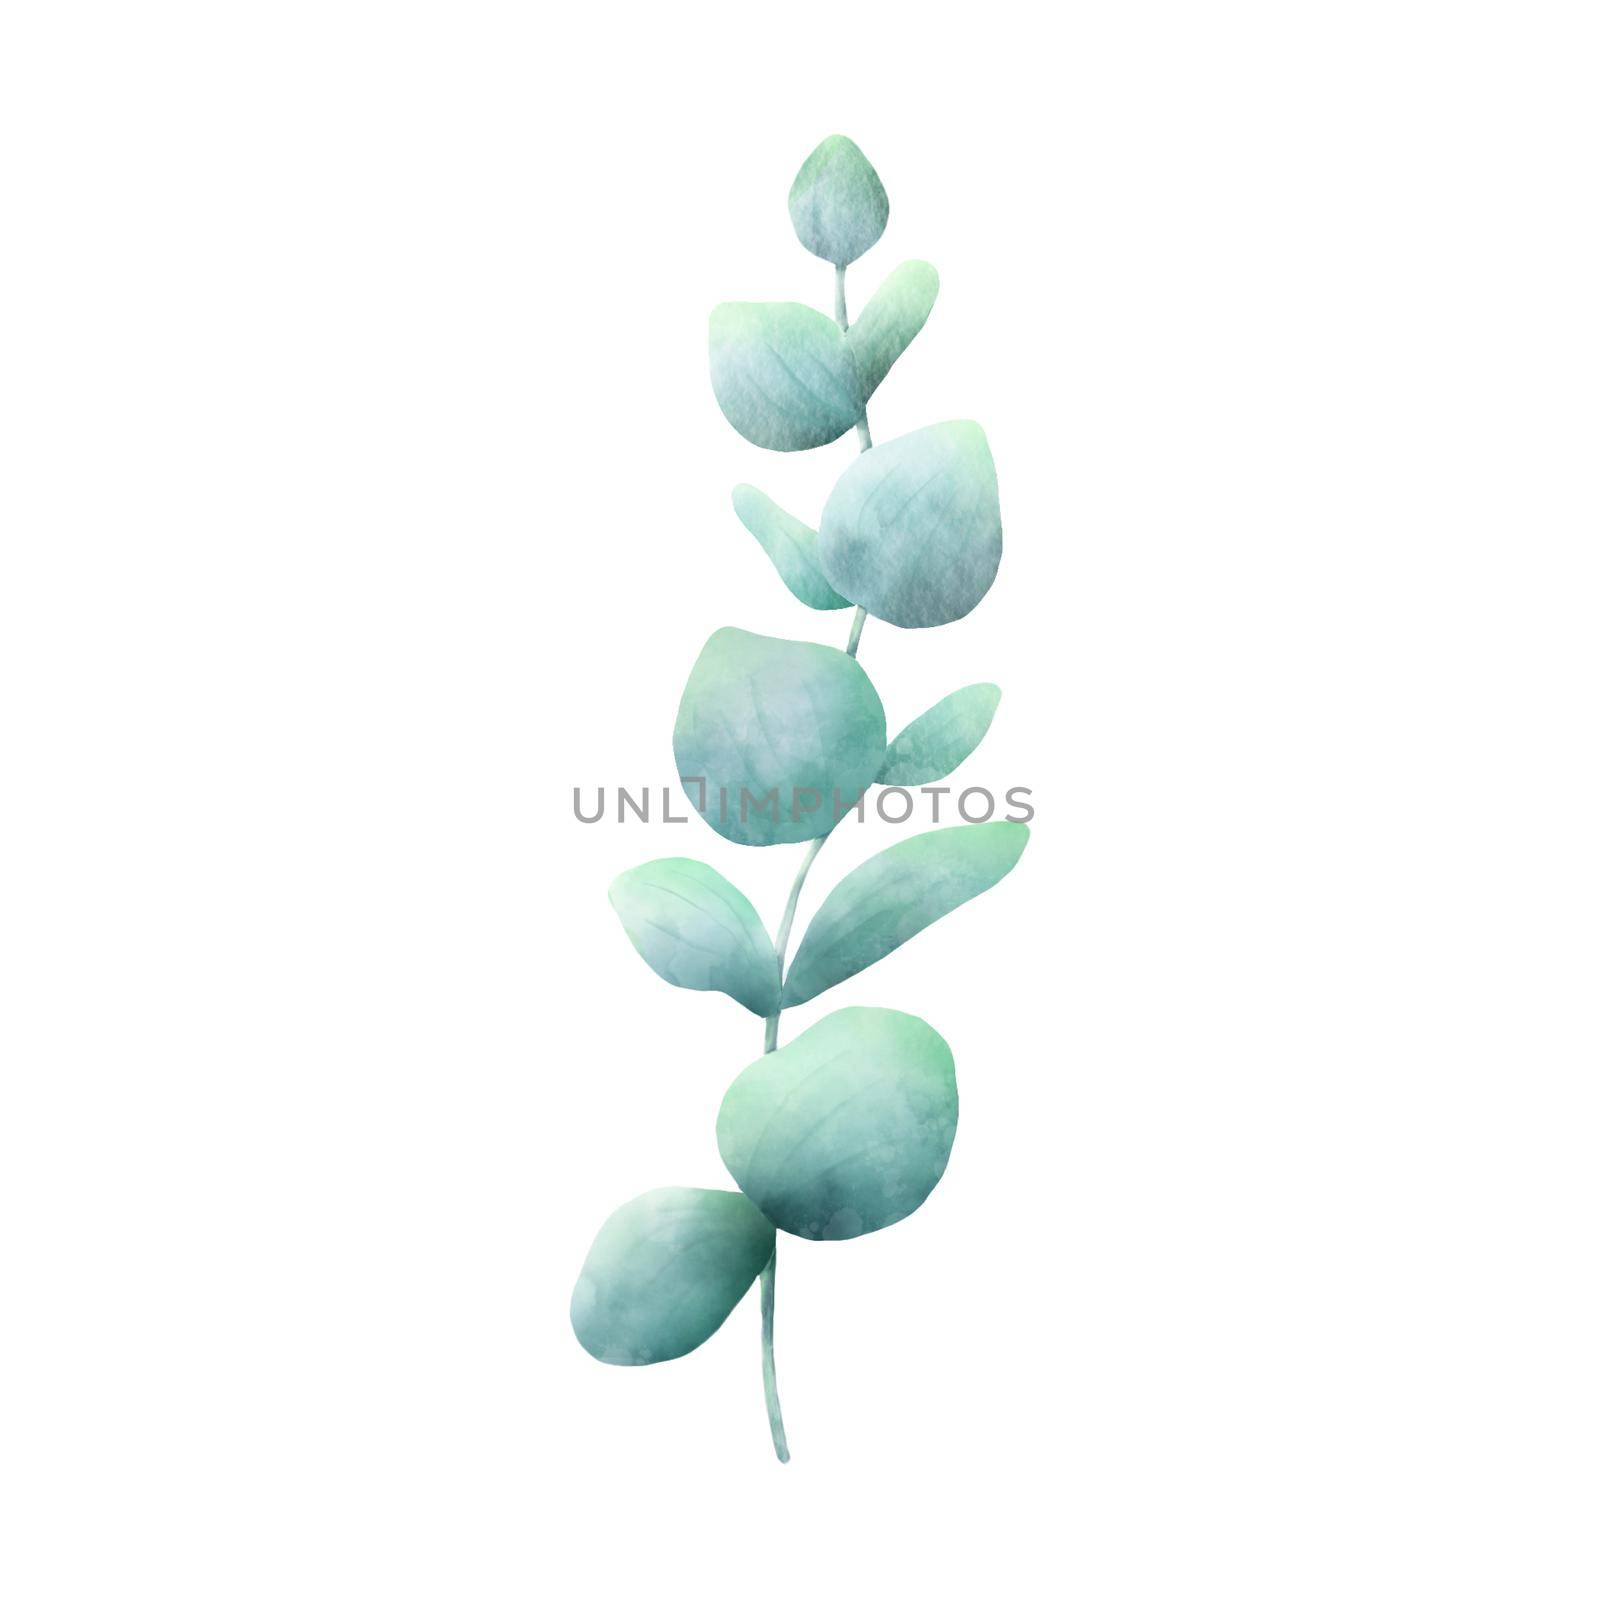 Watercolor Eucaliptus branch drawing. Hand drawn illustration with eucalyptus leaves isolated on white background. Floral herbal image of green plant by ElenaPlatova